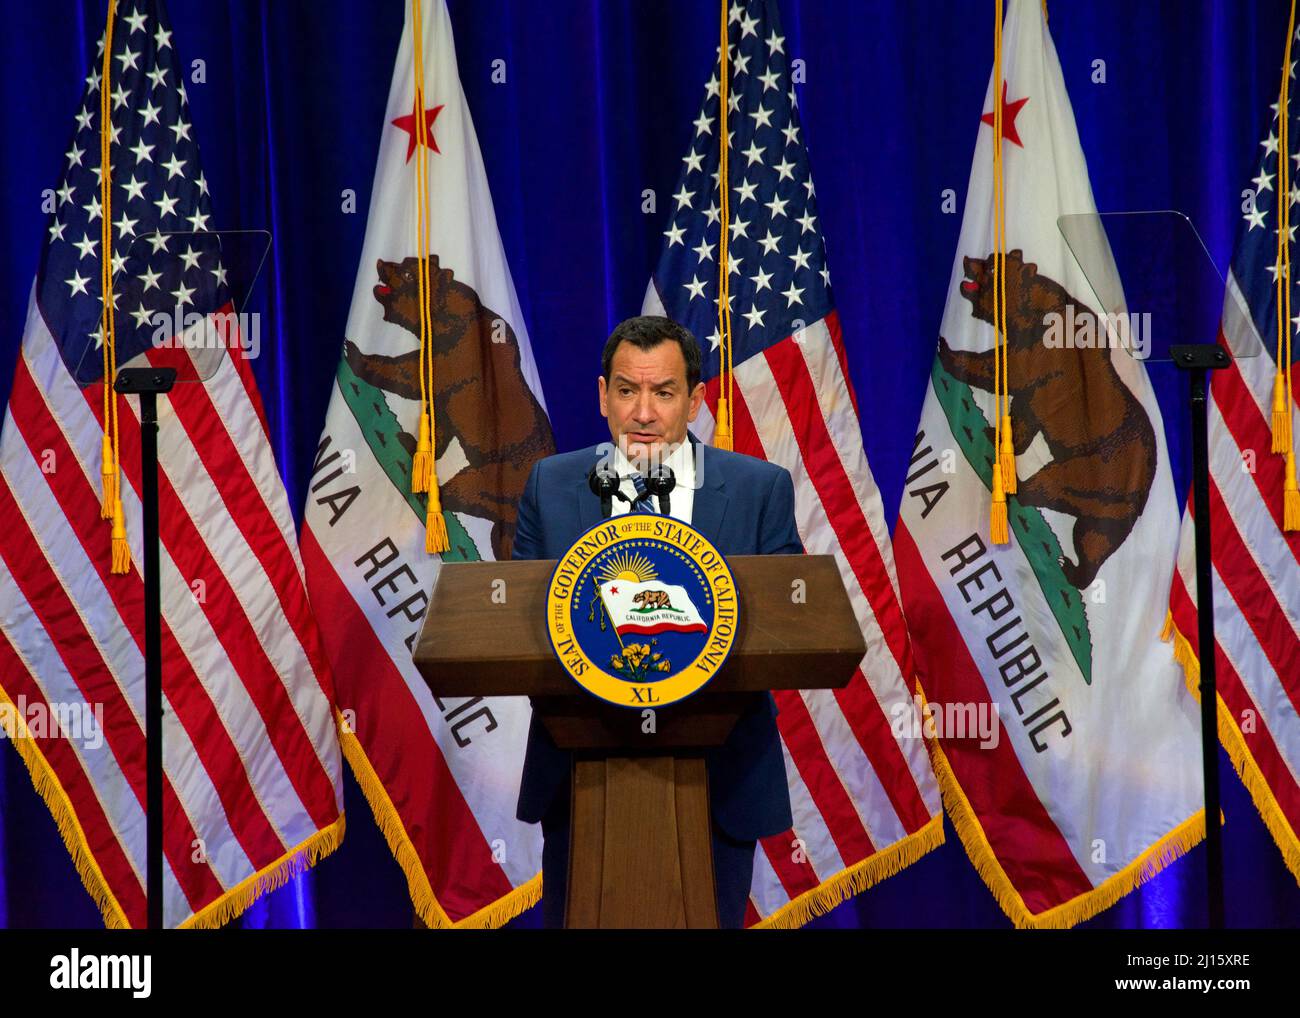 Sacramento, CA - March 8, 2022: The Honorable Anthony Rendon, Speaker of the California Assembly, speaking at the State of the State address in Sacram Stock Photo